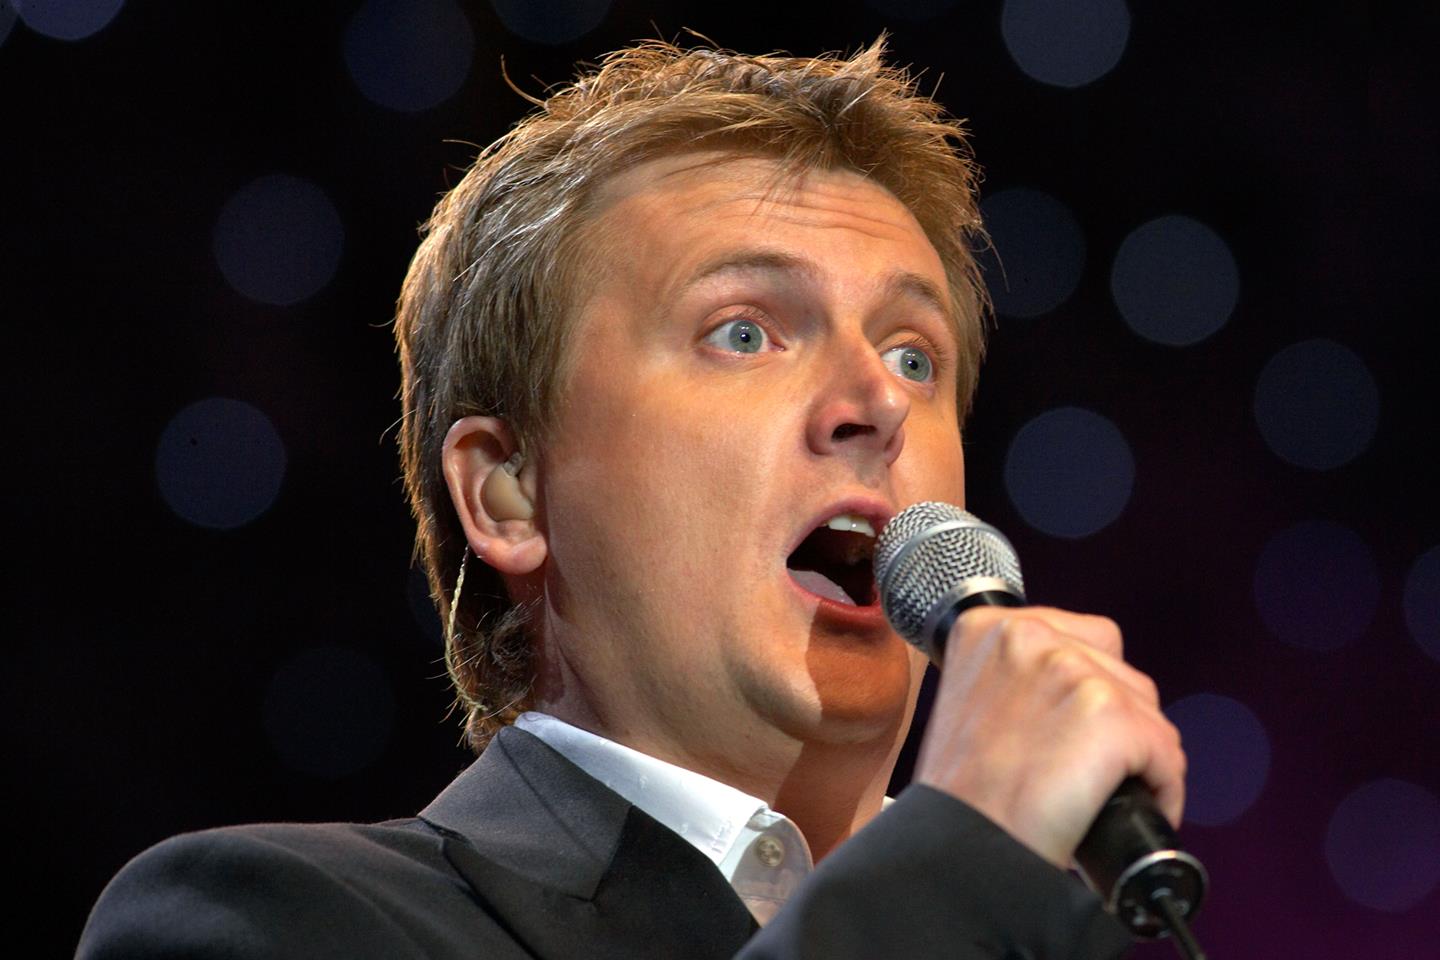 aled jones cathedral tour 2022 dates